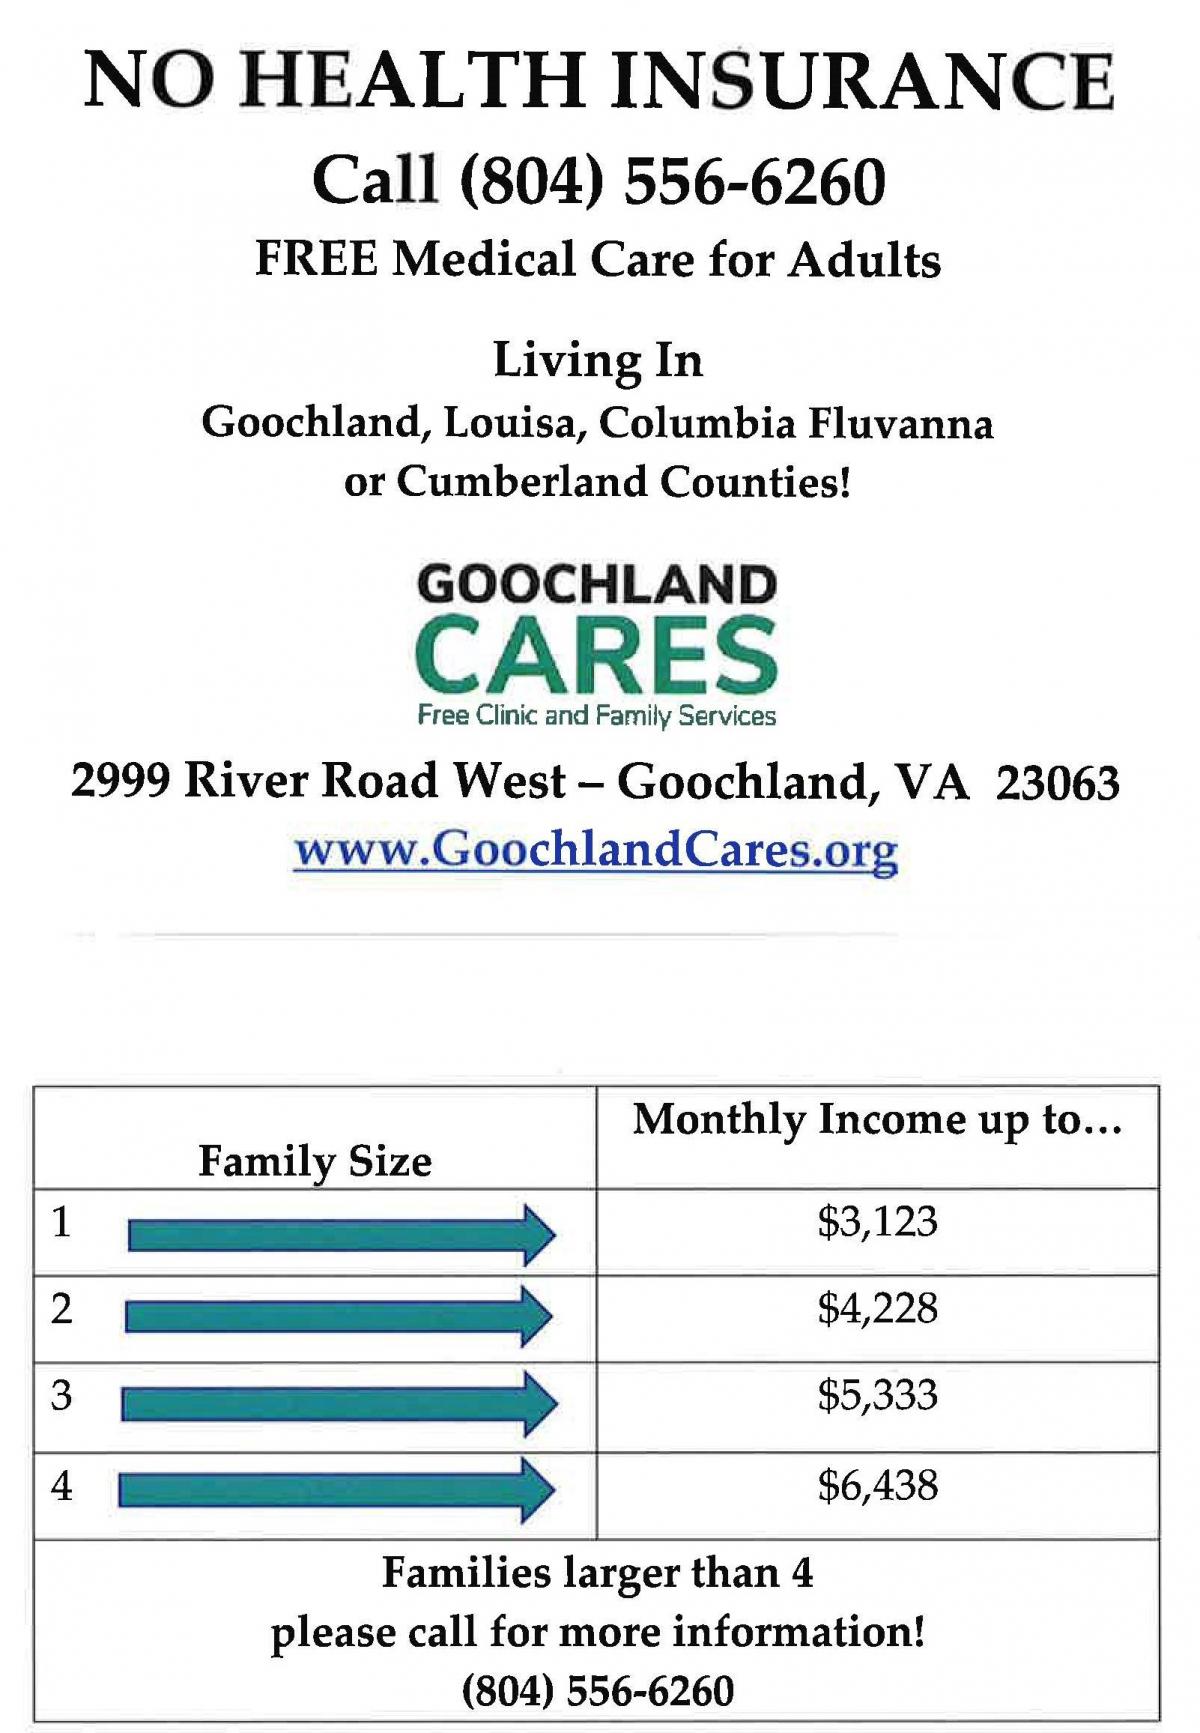 image of text describing Goochland Cares income requirements